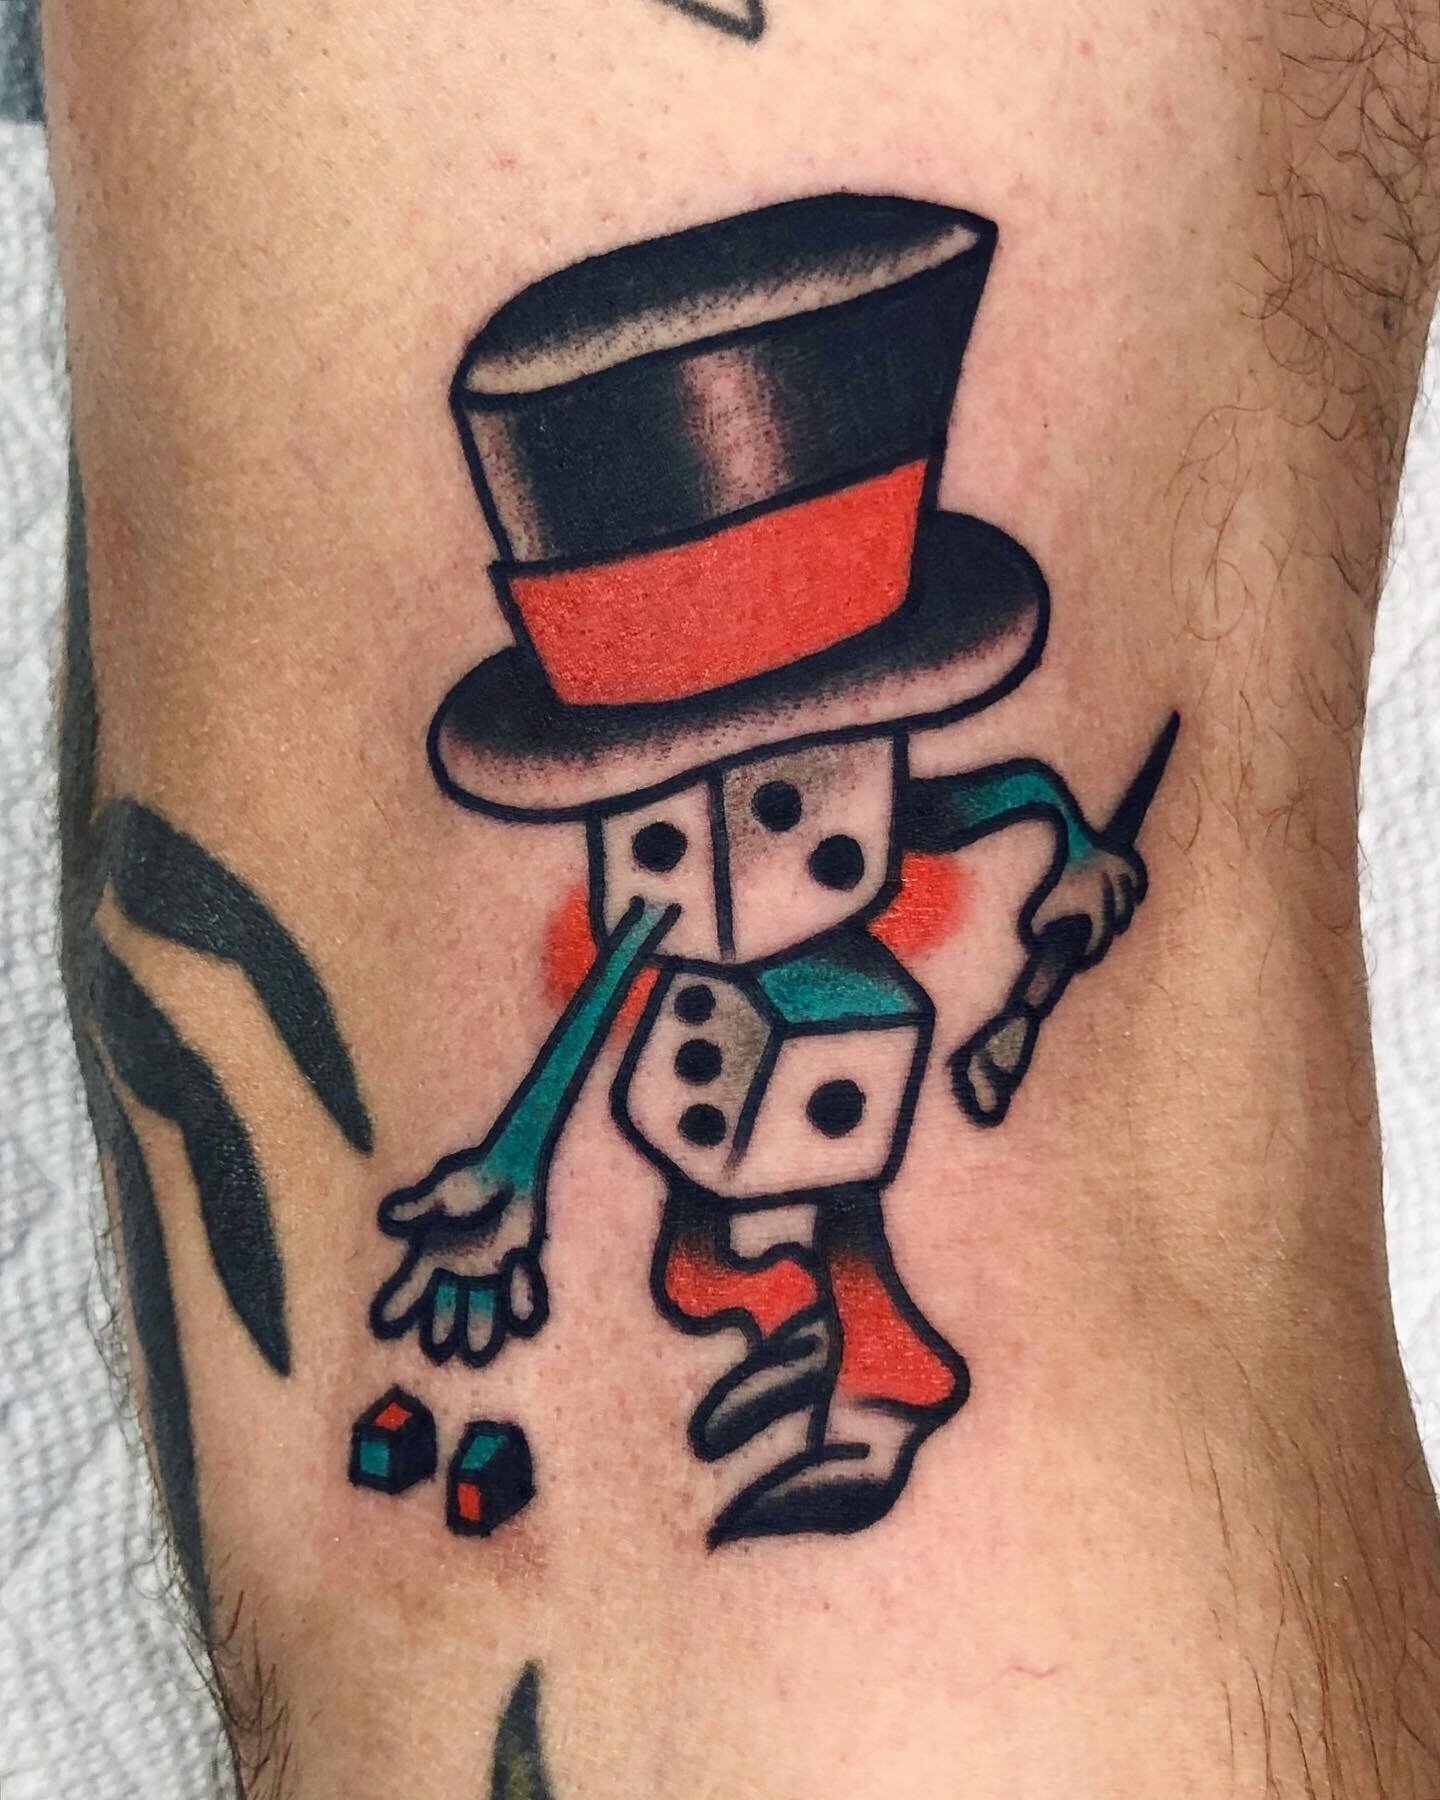 🎲 🎩 
Made yesterday @victorytattooing 
for @donnie.funshoes 👞👞
Thank you so much man 
.
.
.
.
.
.
.
.
.
.
.
.

#tattoo #tatuagem #traditionaltattoo #oldschooltattoo #ink #flashtattoo #vancouvertattoo #vancouvertattooartist #oldlines #oldworkers #